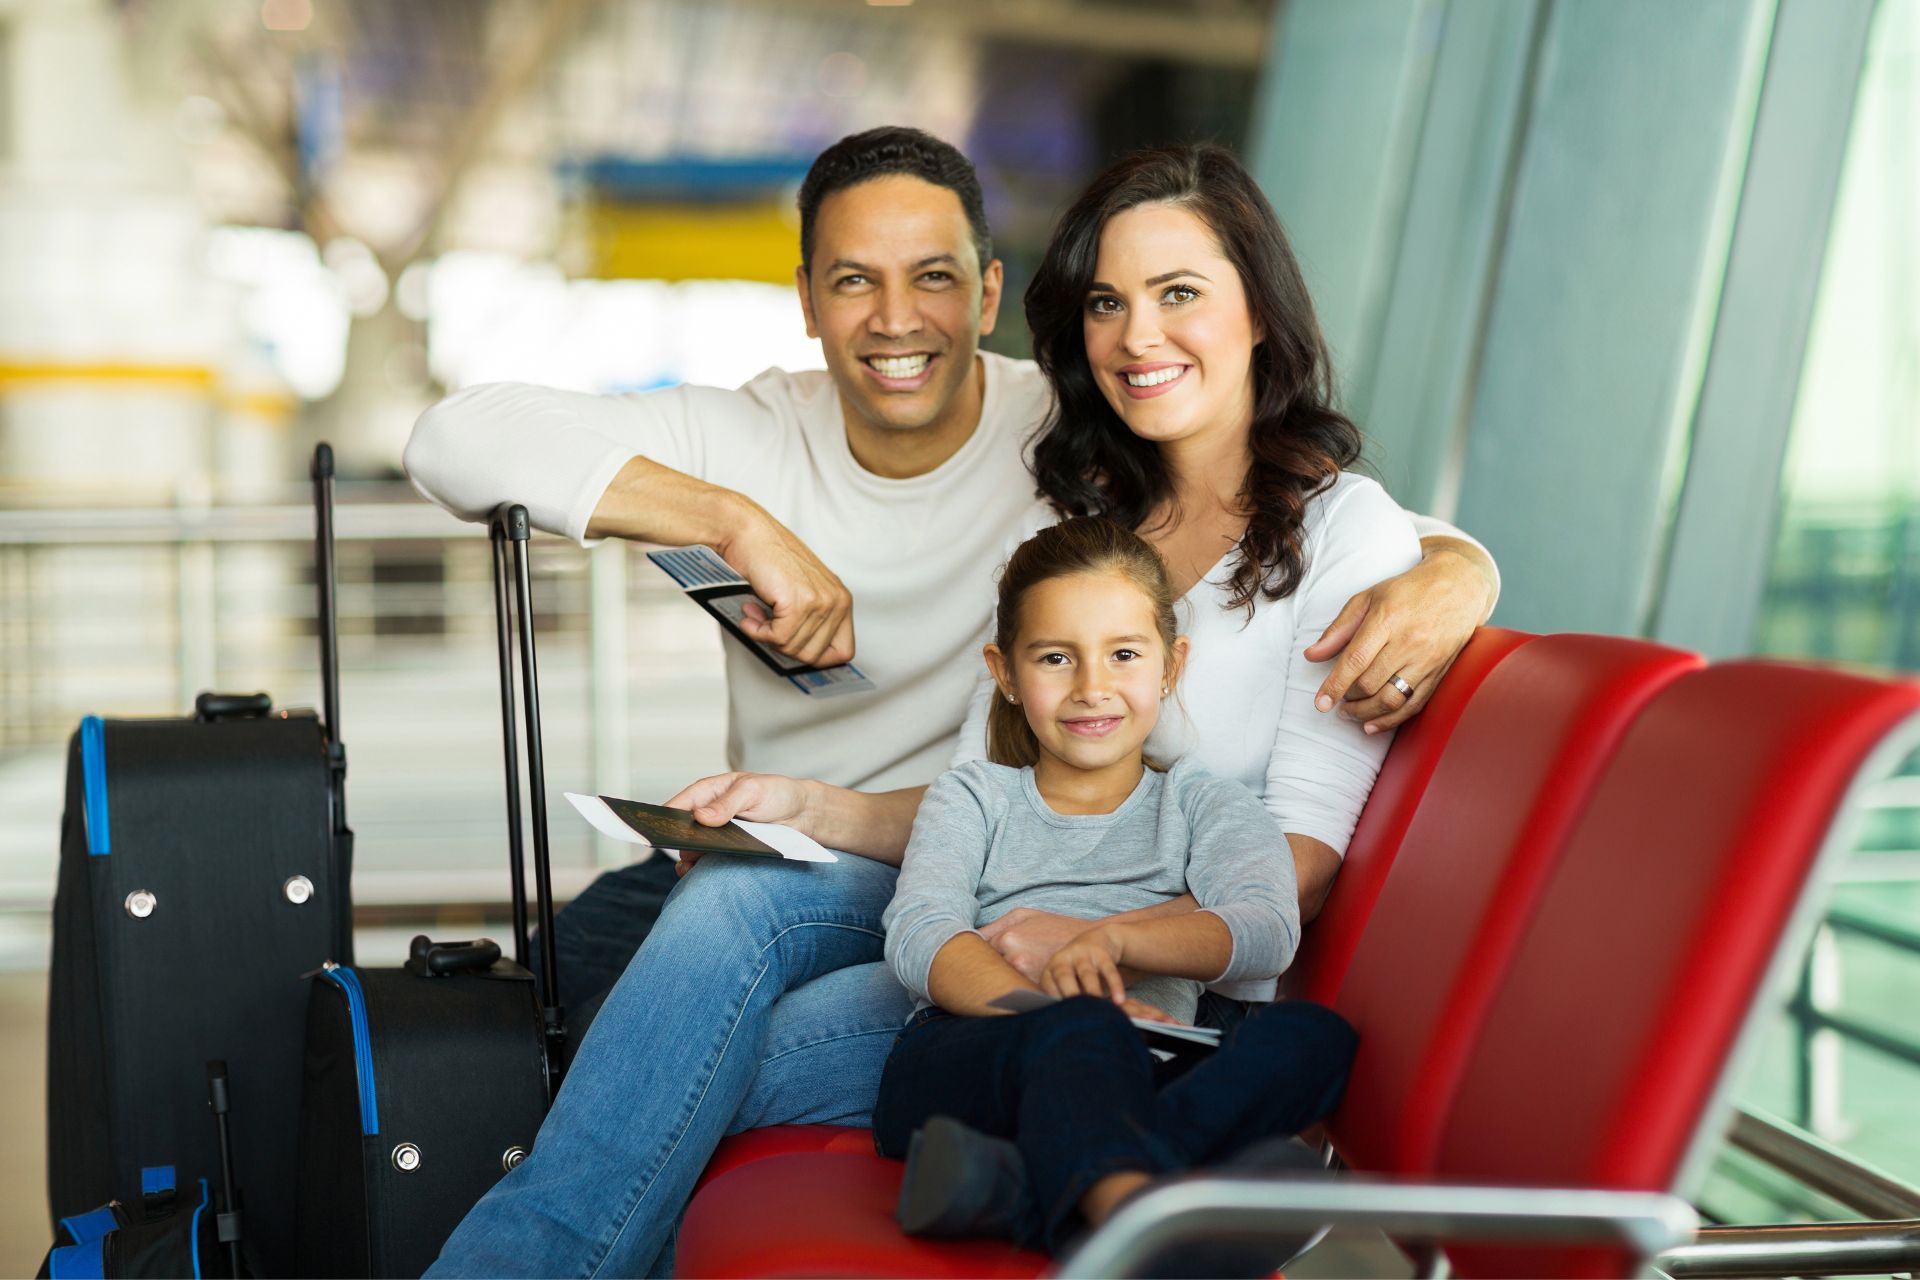 Happy family at airport waiting for flight